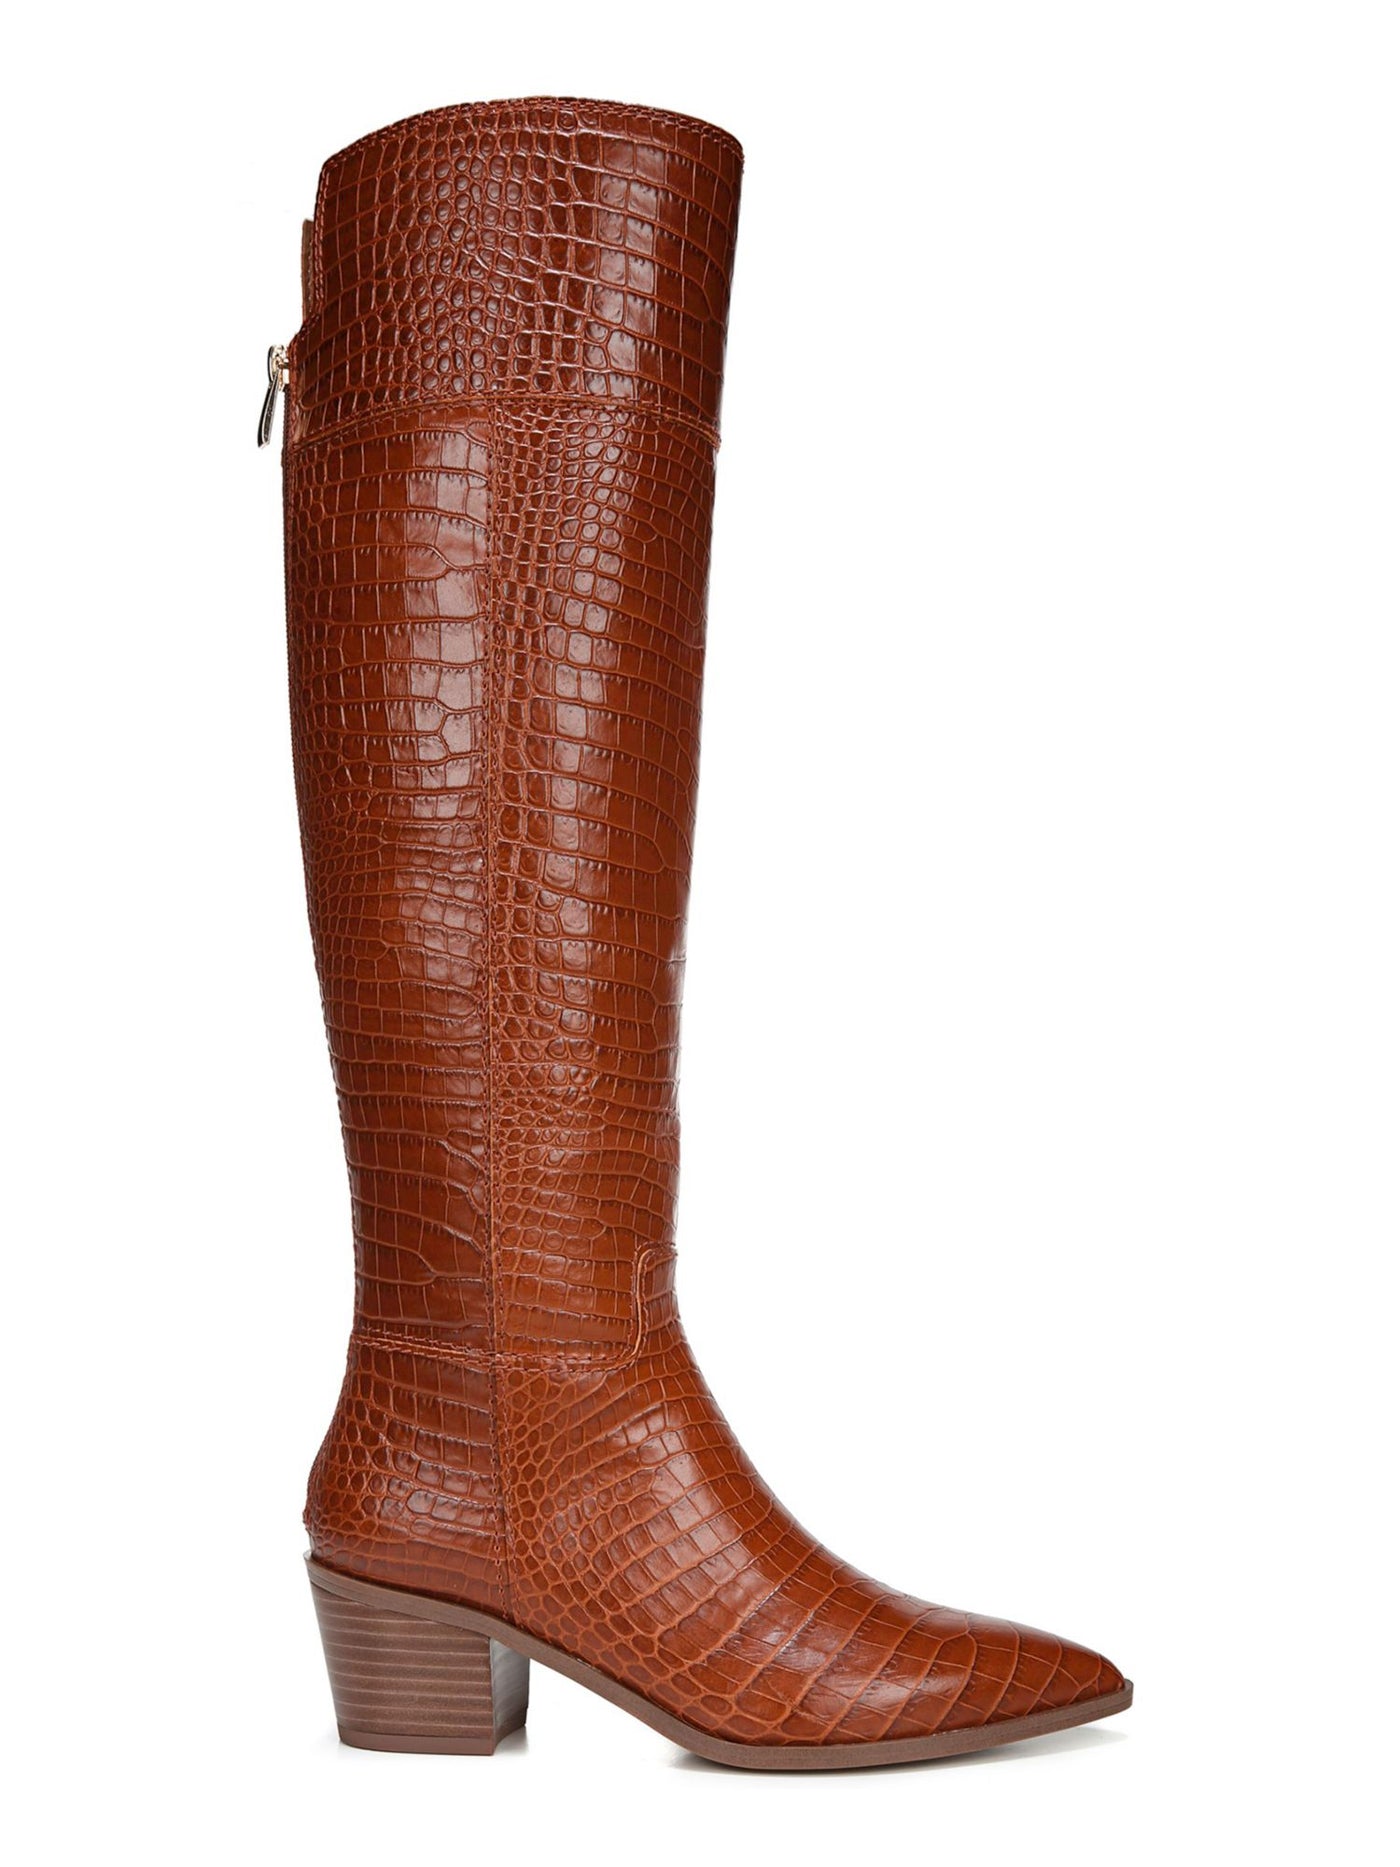 FRANCO SARTO Womens Brown Bead-Link Trim At Welt Cushioned Becky Round Toe Stacked Heel Zip-Up Leather Riding Boot 7.5